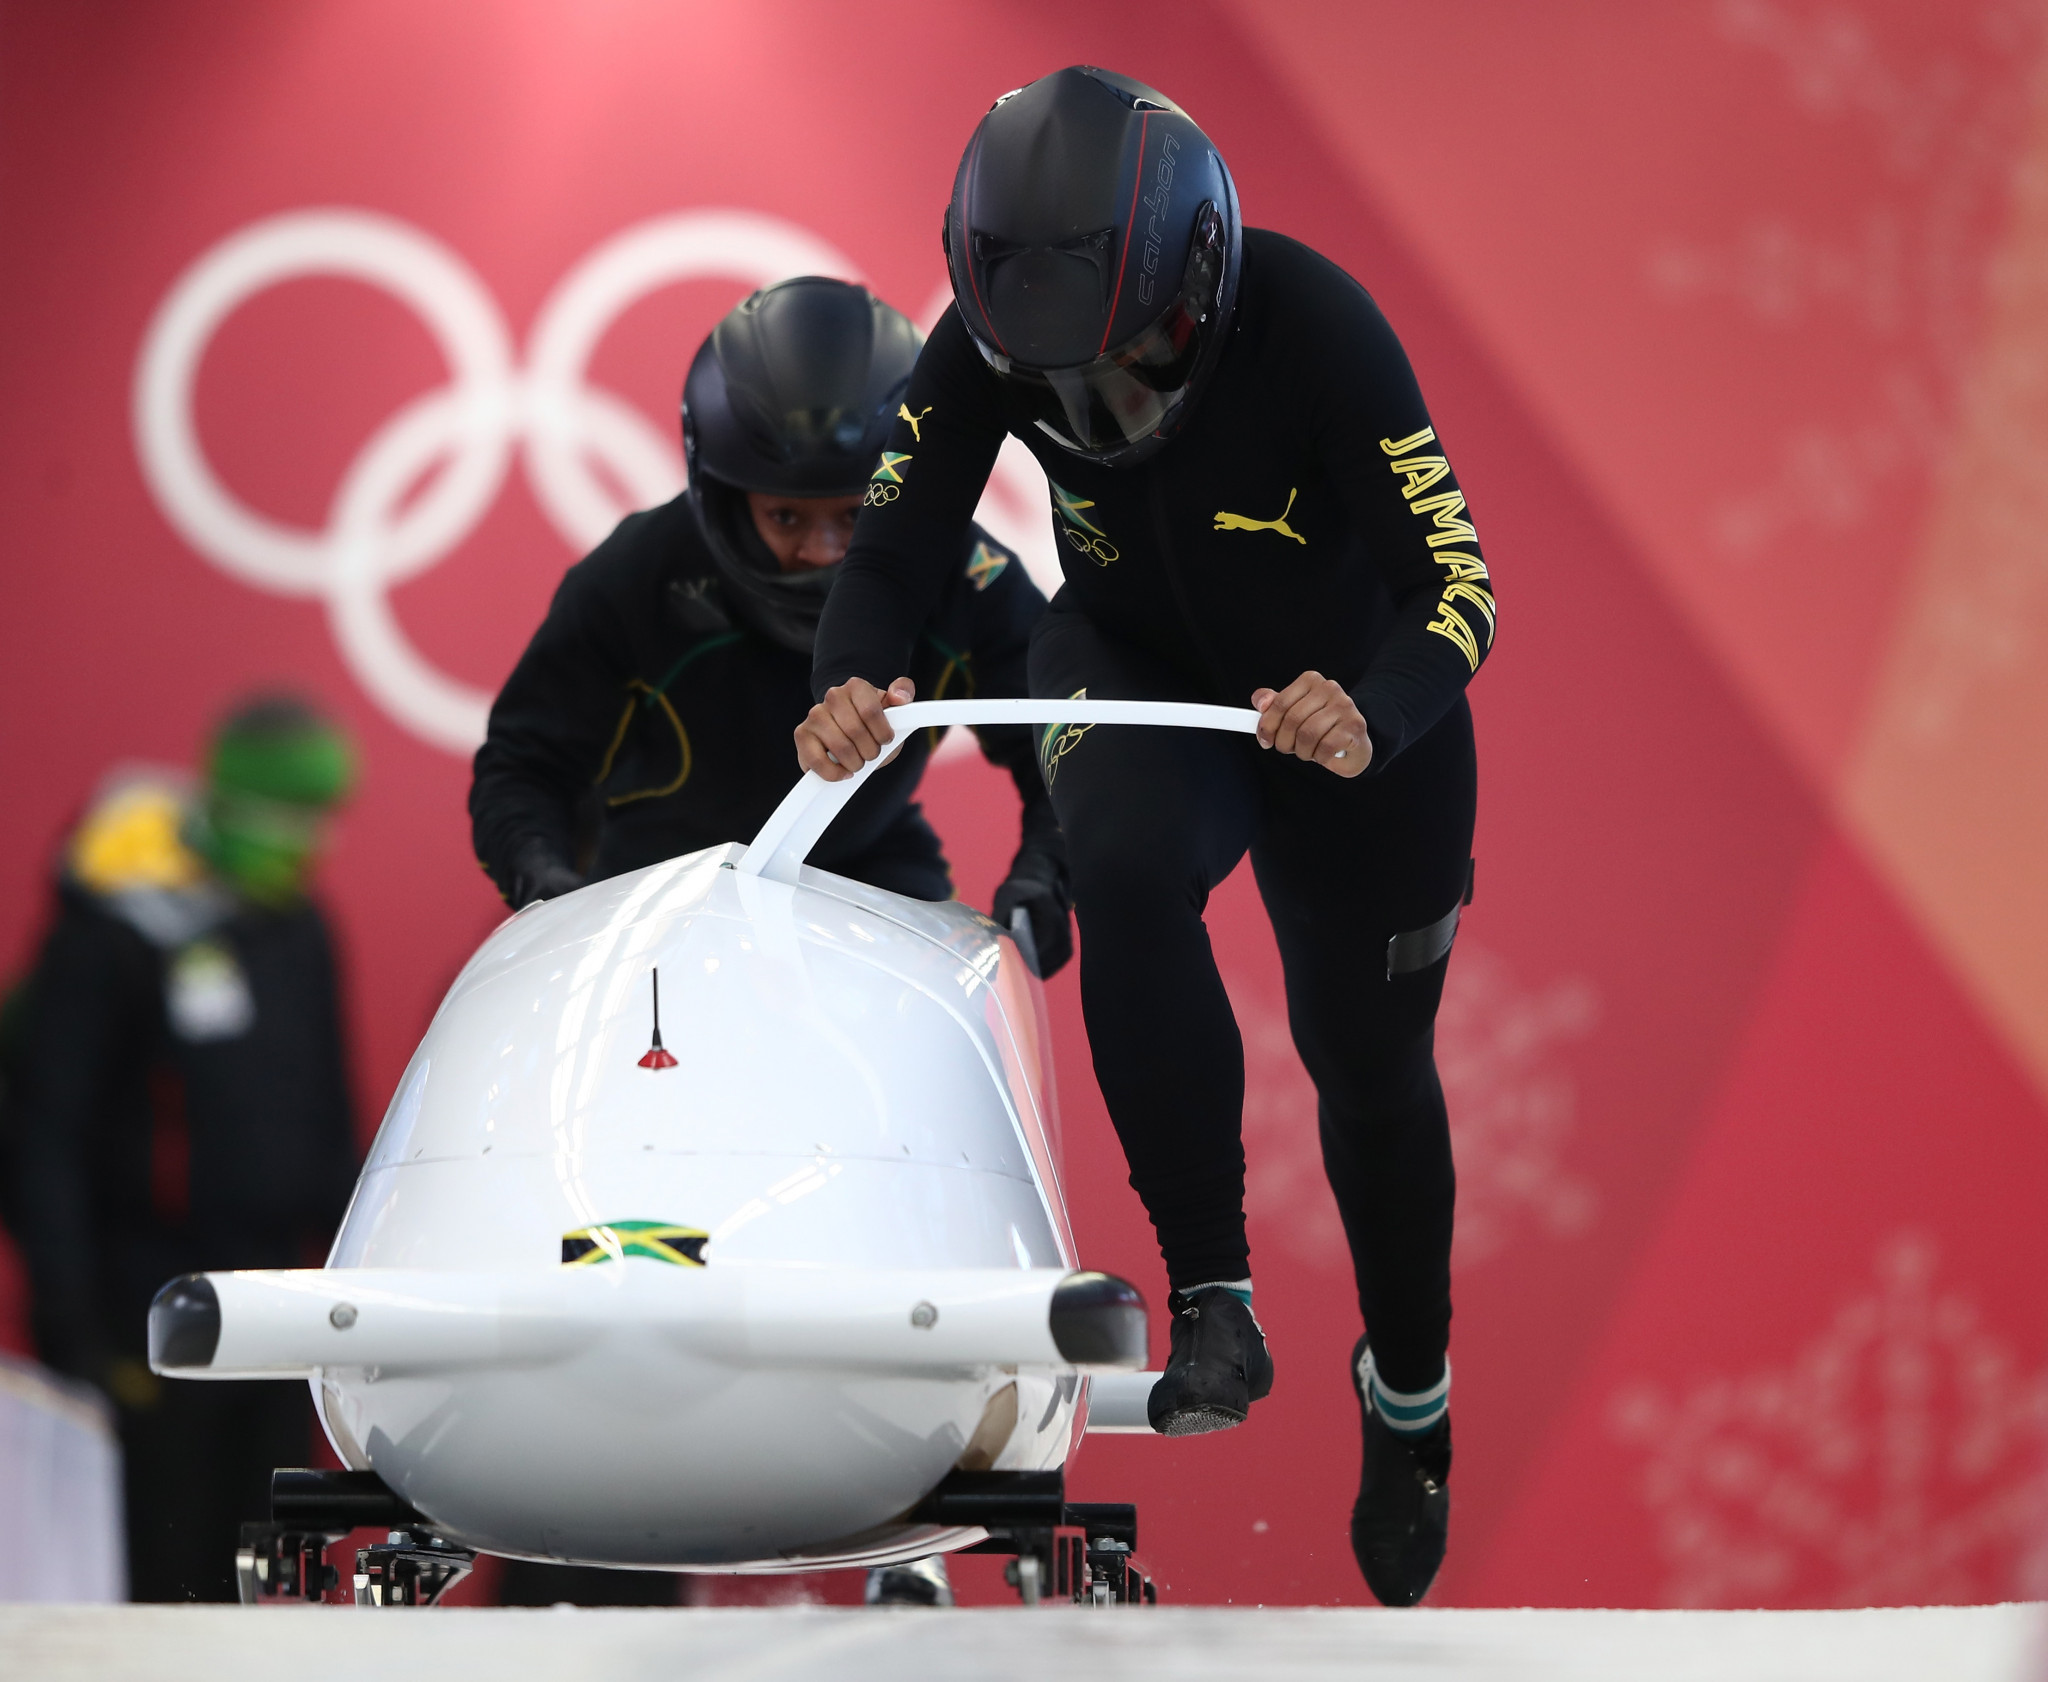 Beer Runnings as Red Stripe buy new sled for Jamaican bobsleigh team at Pyeongchang 2018 